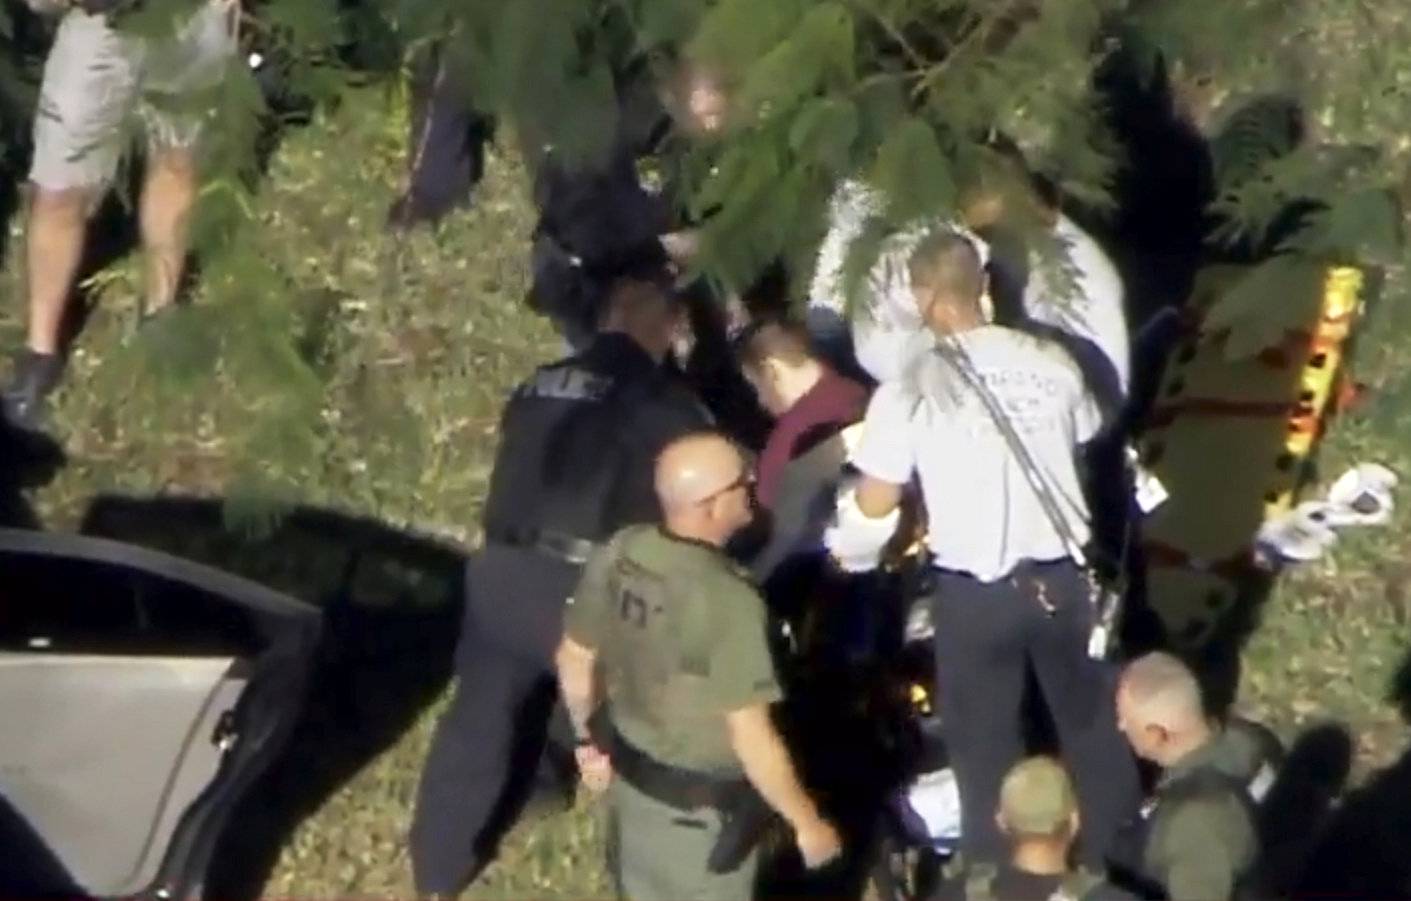 A man placed in handcuffs by police is loaded onto a stretcher near Marjory Stoneman Douglas High School following a shooting incident in Parkland